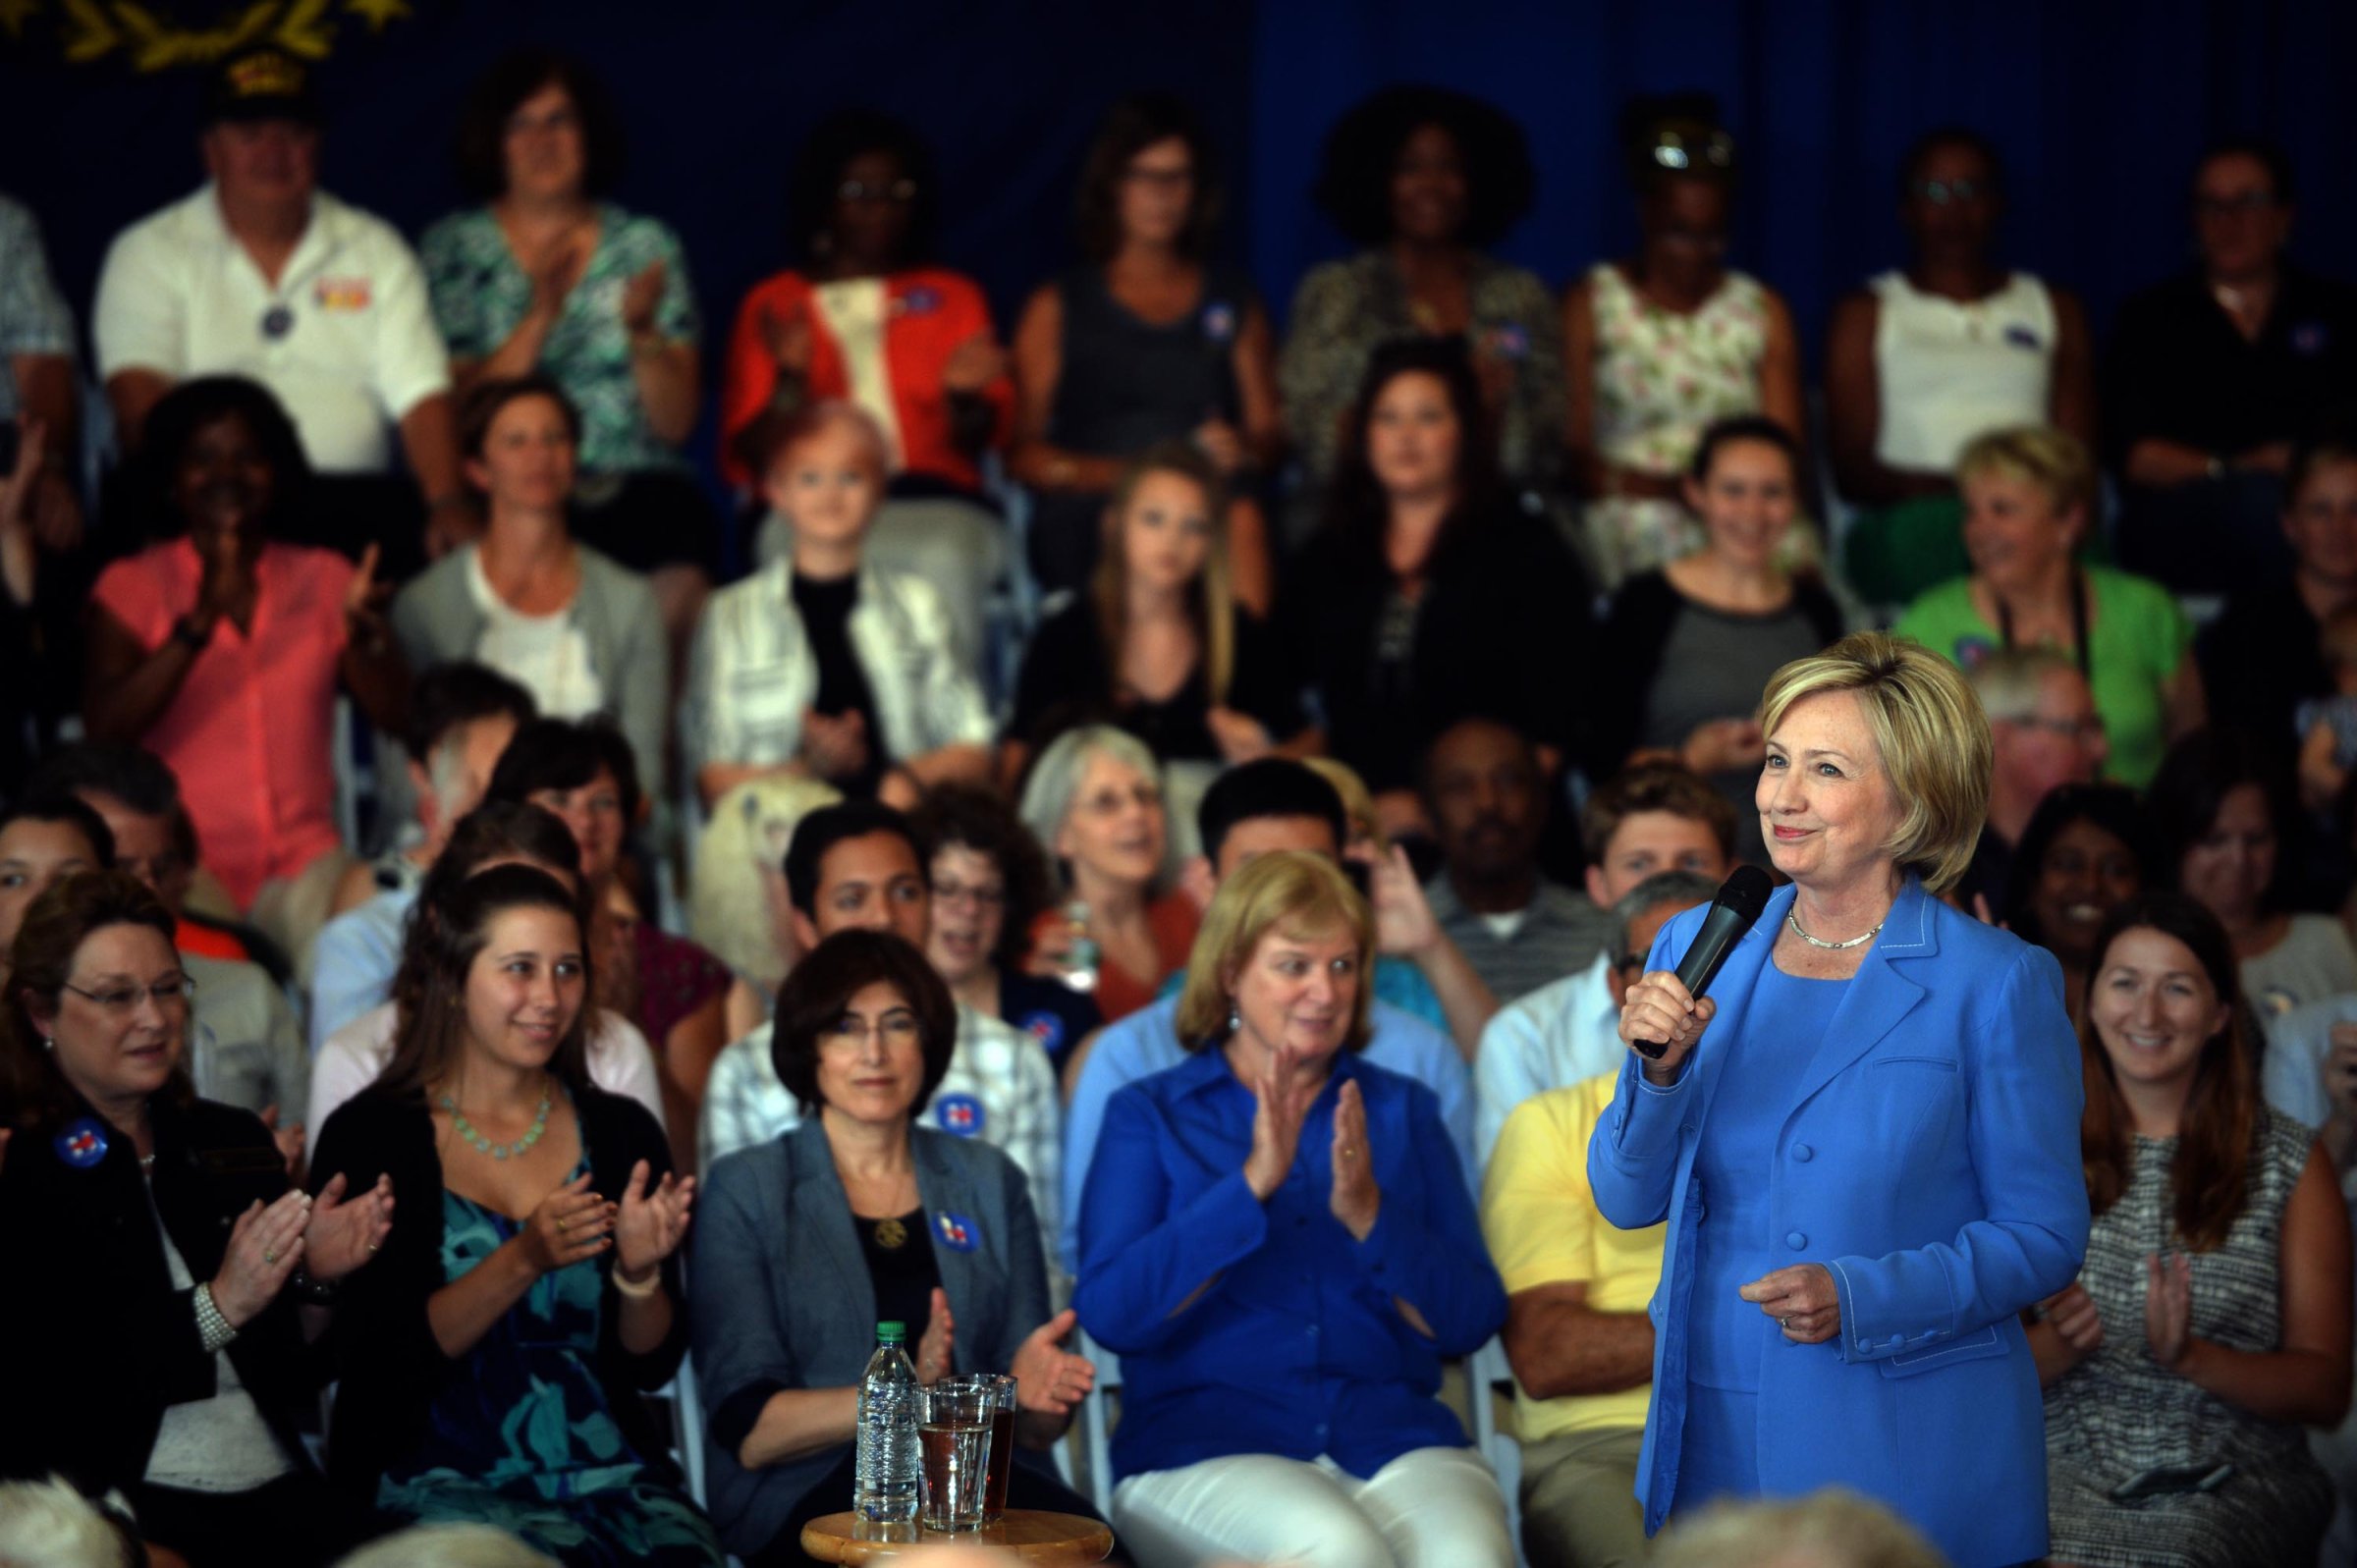 DOVER, NH - JULY 16: Democratic Presidential candidate Hillary Clinton speaks during a town hall event at Dover City Hall July 16, 2015 in Dover, New Hampshire. Clinton spoke about how to build an economy that will boost the middle class. (Photo by Darren McCollester/Getty Images) *** Local Caption *** Hillary Clinton